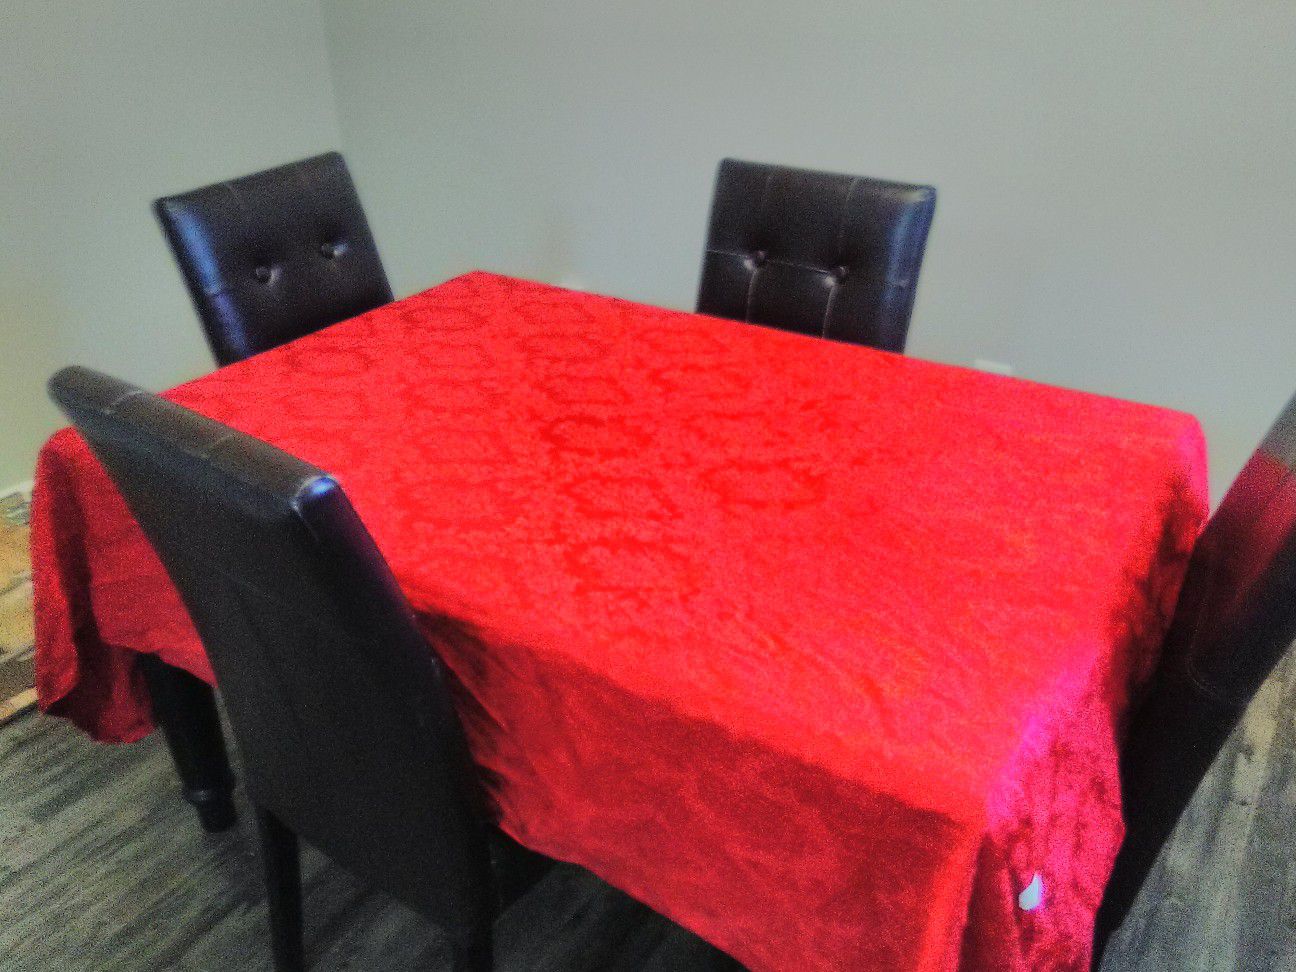 USED DINING/KITCHEN TABLE W/ 4 CHAIRS